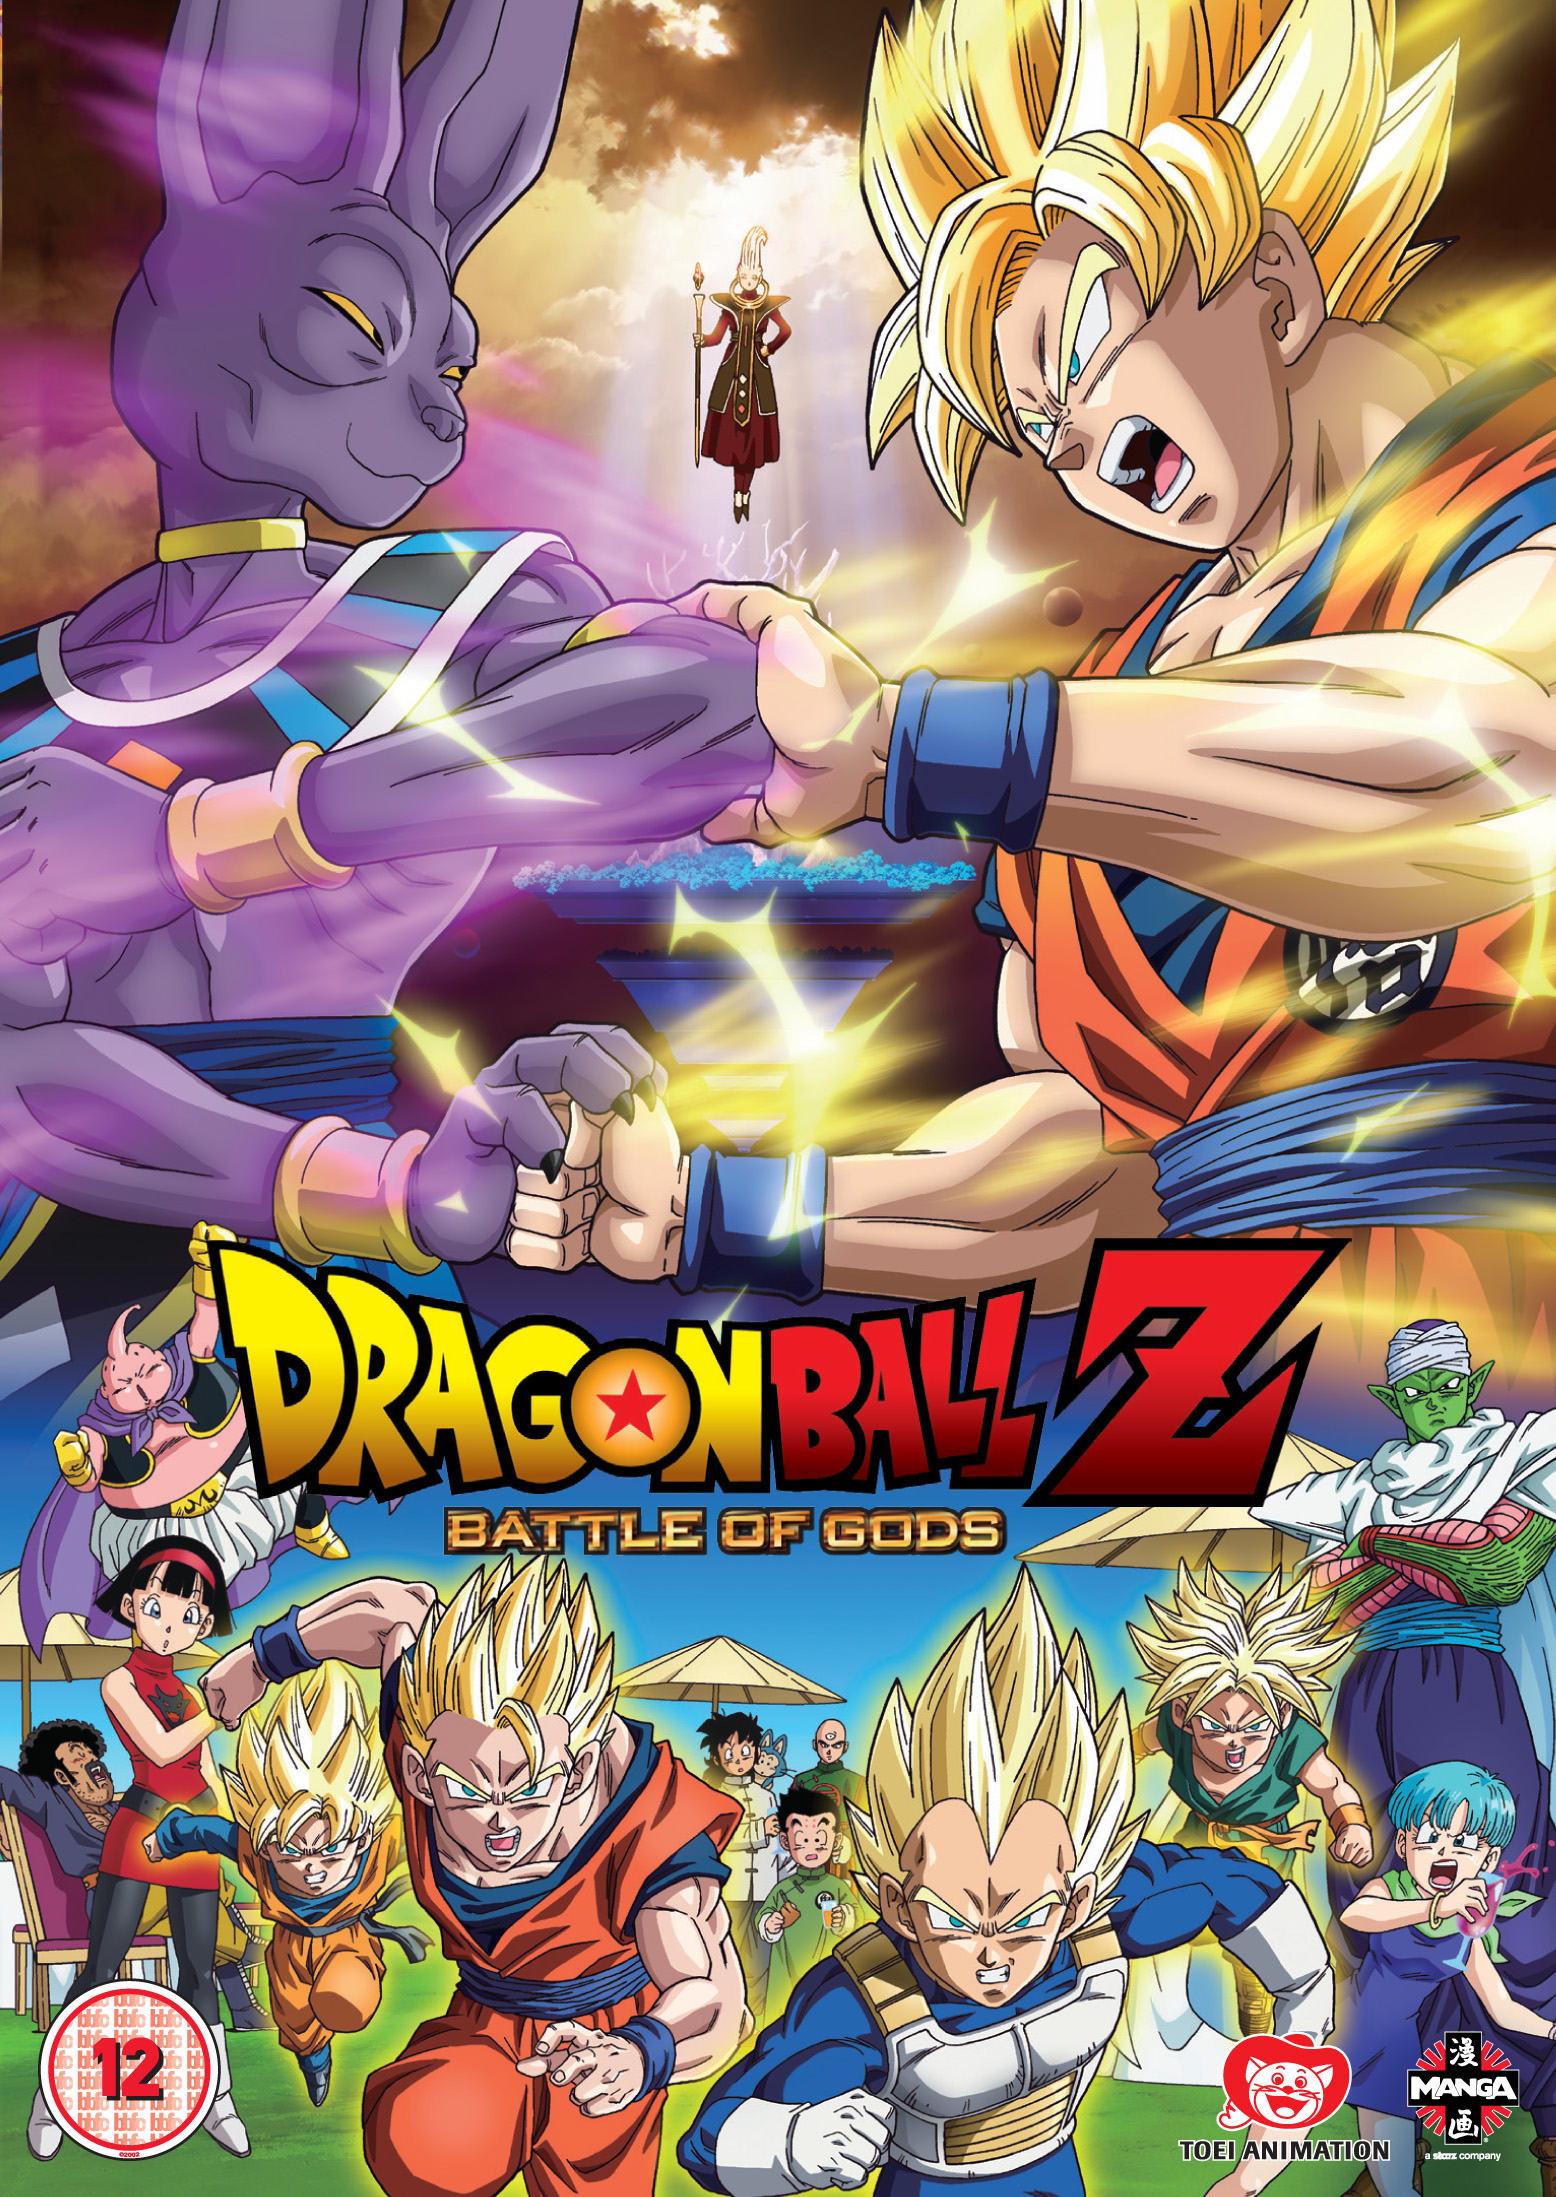 Anime and Manga Reviews: MOVIE REVIEW: DRAGON BALL Z: BATTLE OF GODS